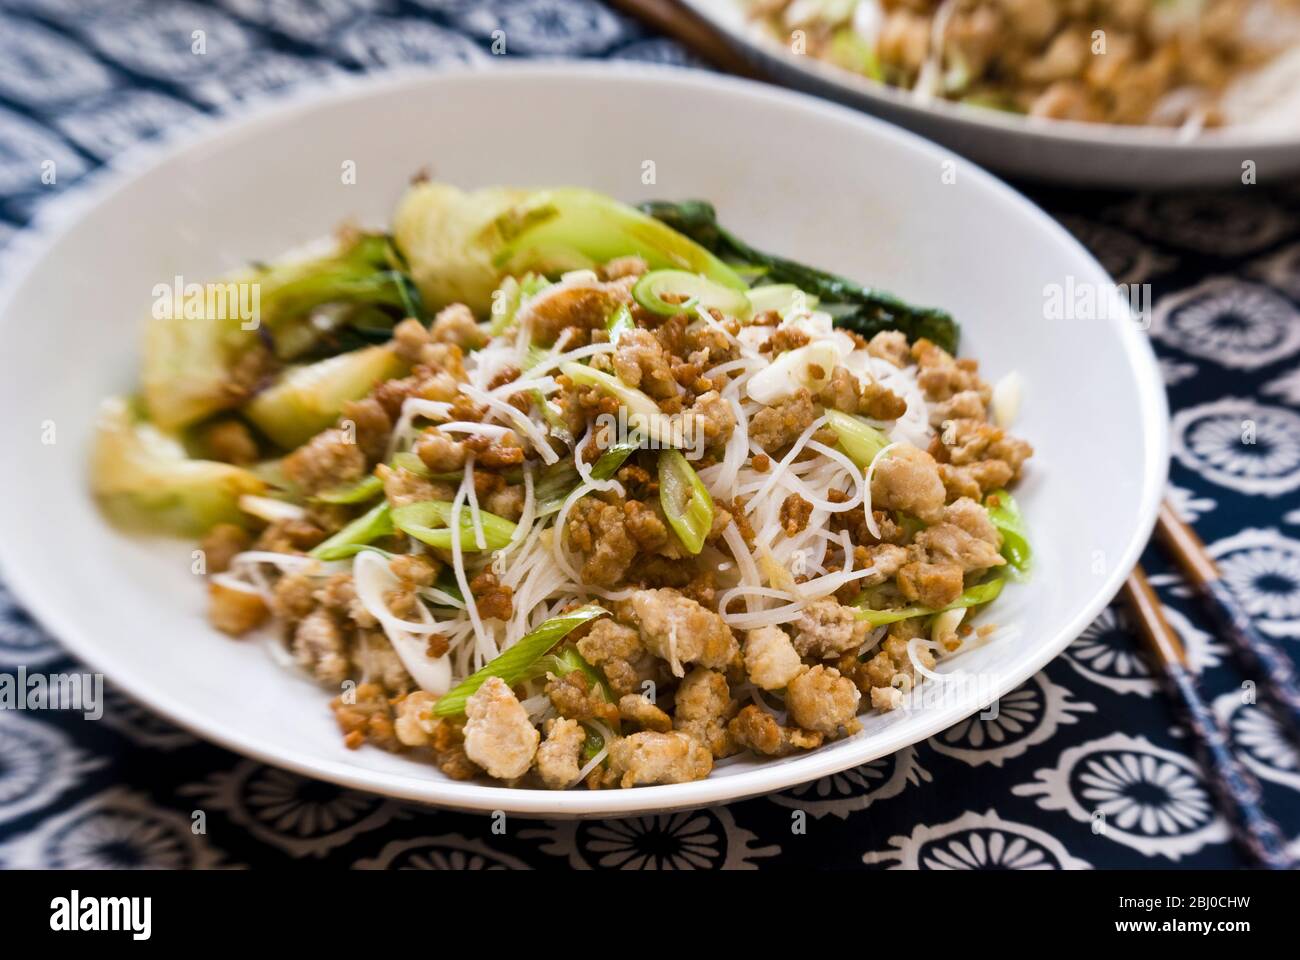 Larb - a Thai dish of minced pork, fried with garlic, grated fresh ginger, chilli pepper, and dressed in lime juice and thai fish sauce (Nam Pla). The Stock Photo